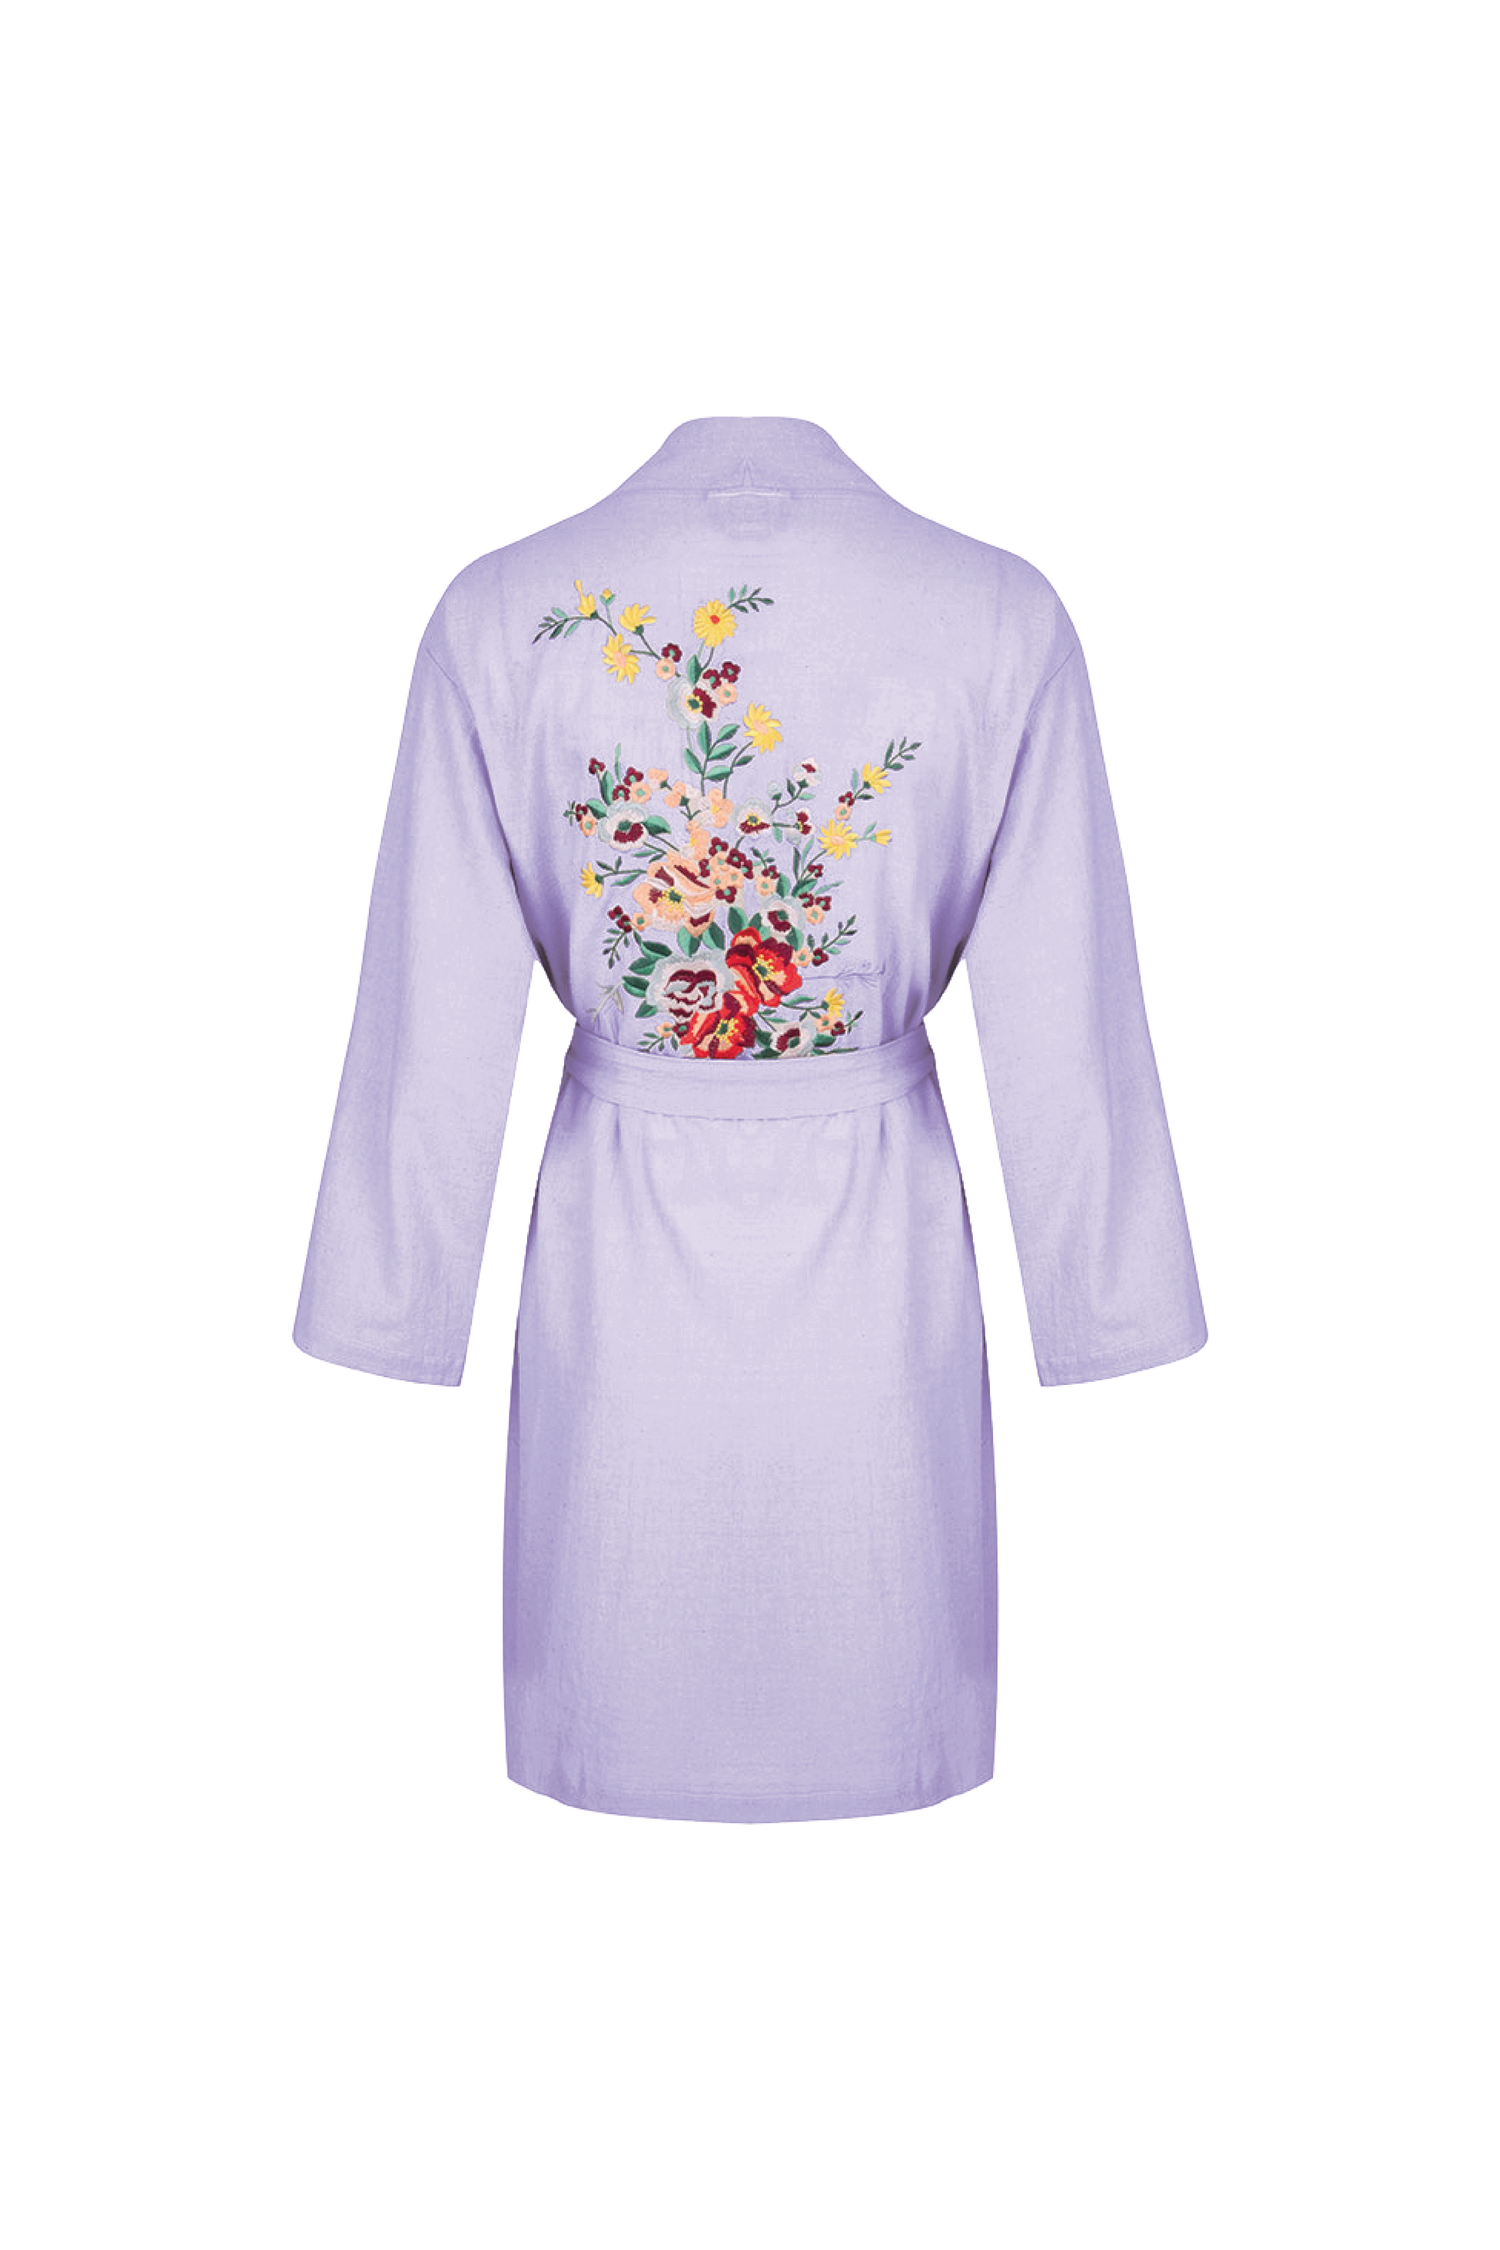  Hammam34 Lilac kimono with flowers embroidery detail on the back